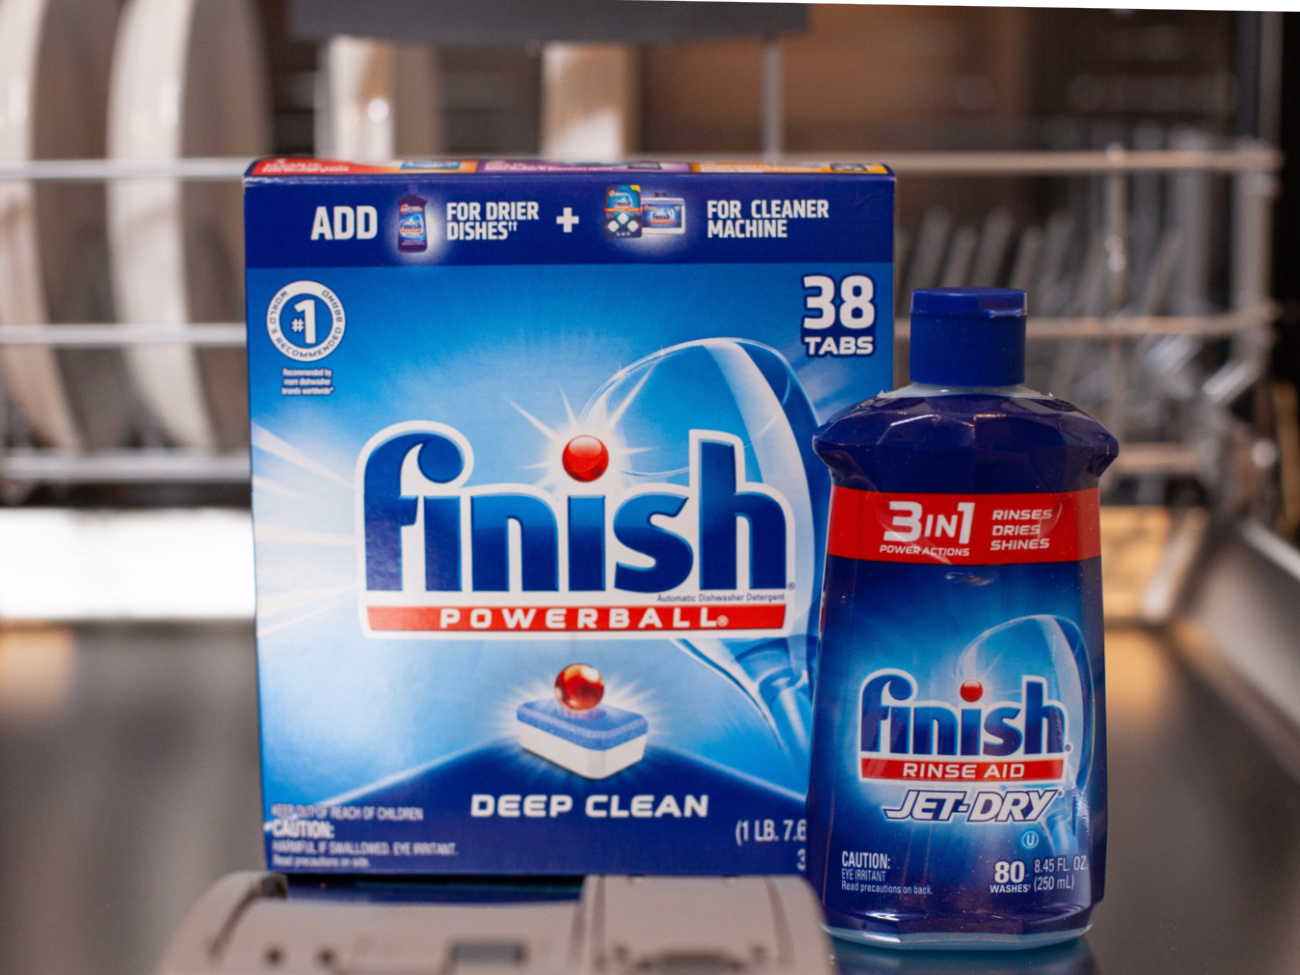 Finish Jet Dry Or Quantum Dishwasher Detergent As Low As $1.19 At Kroger -  iHeartKroger